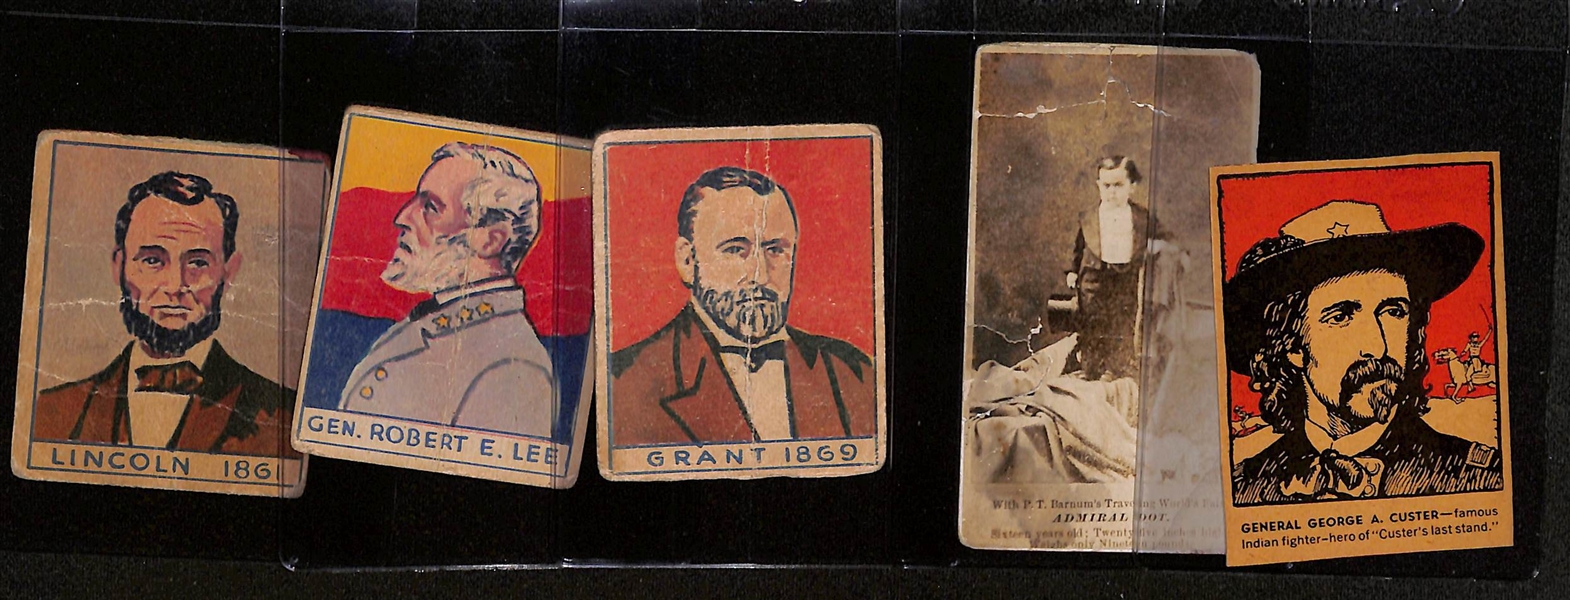 (3) 1930 American History R129  Cards (Lincoln, Lee, Grant), 1880s P.T. Barnum Sideshow Card, & 1930 Post Cereal General Custer